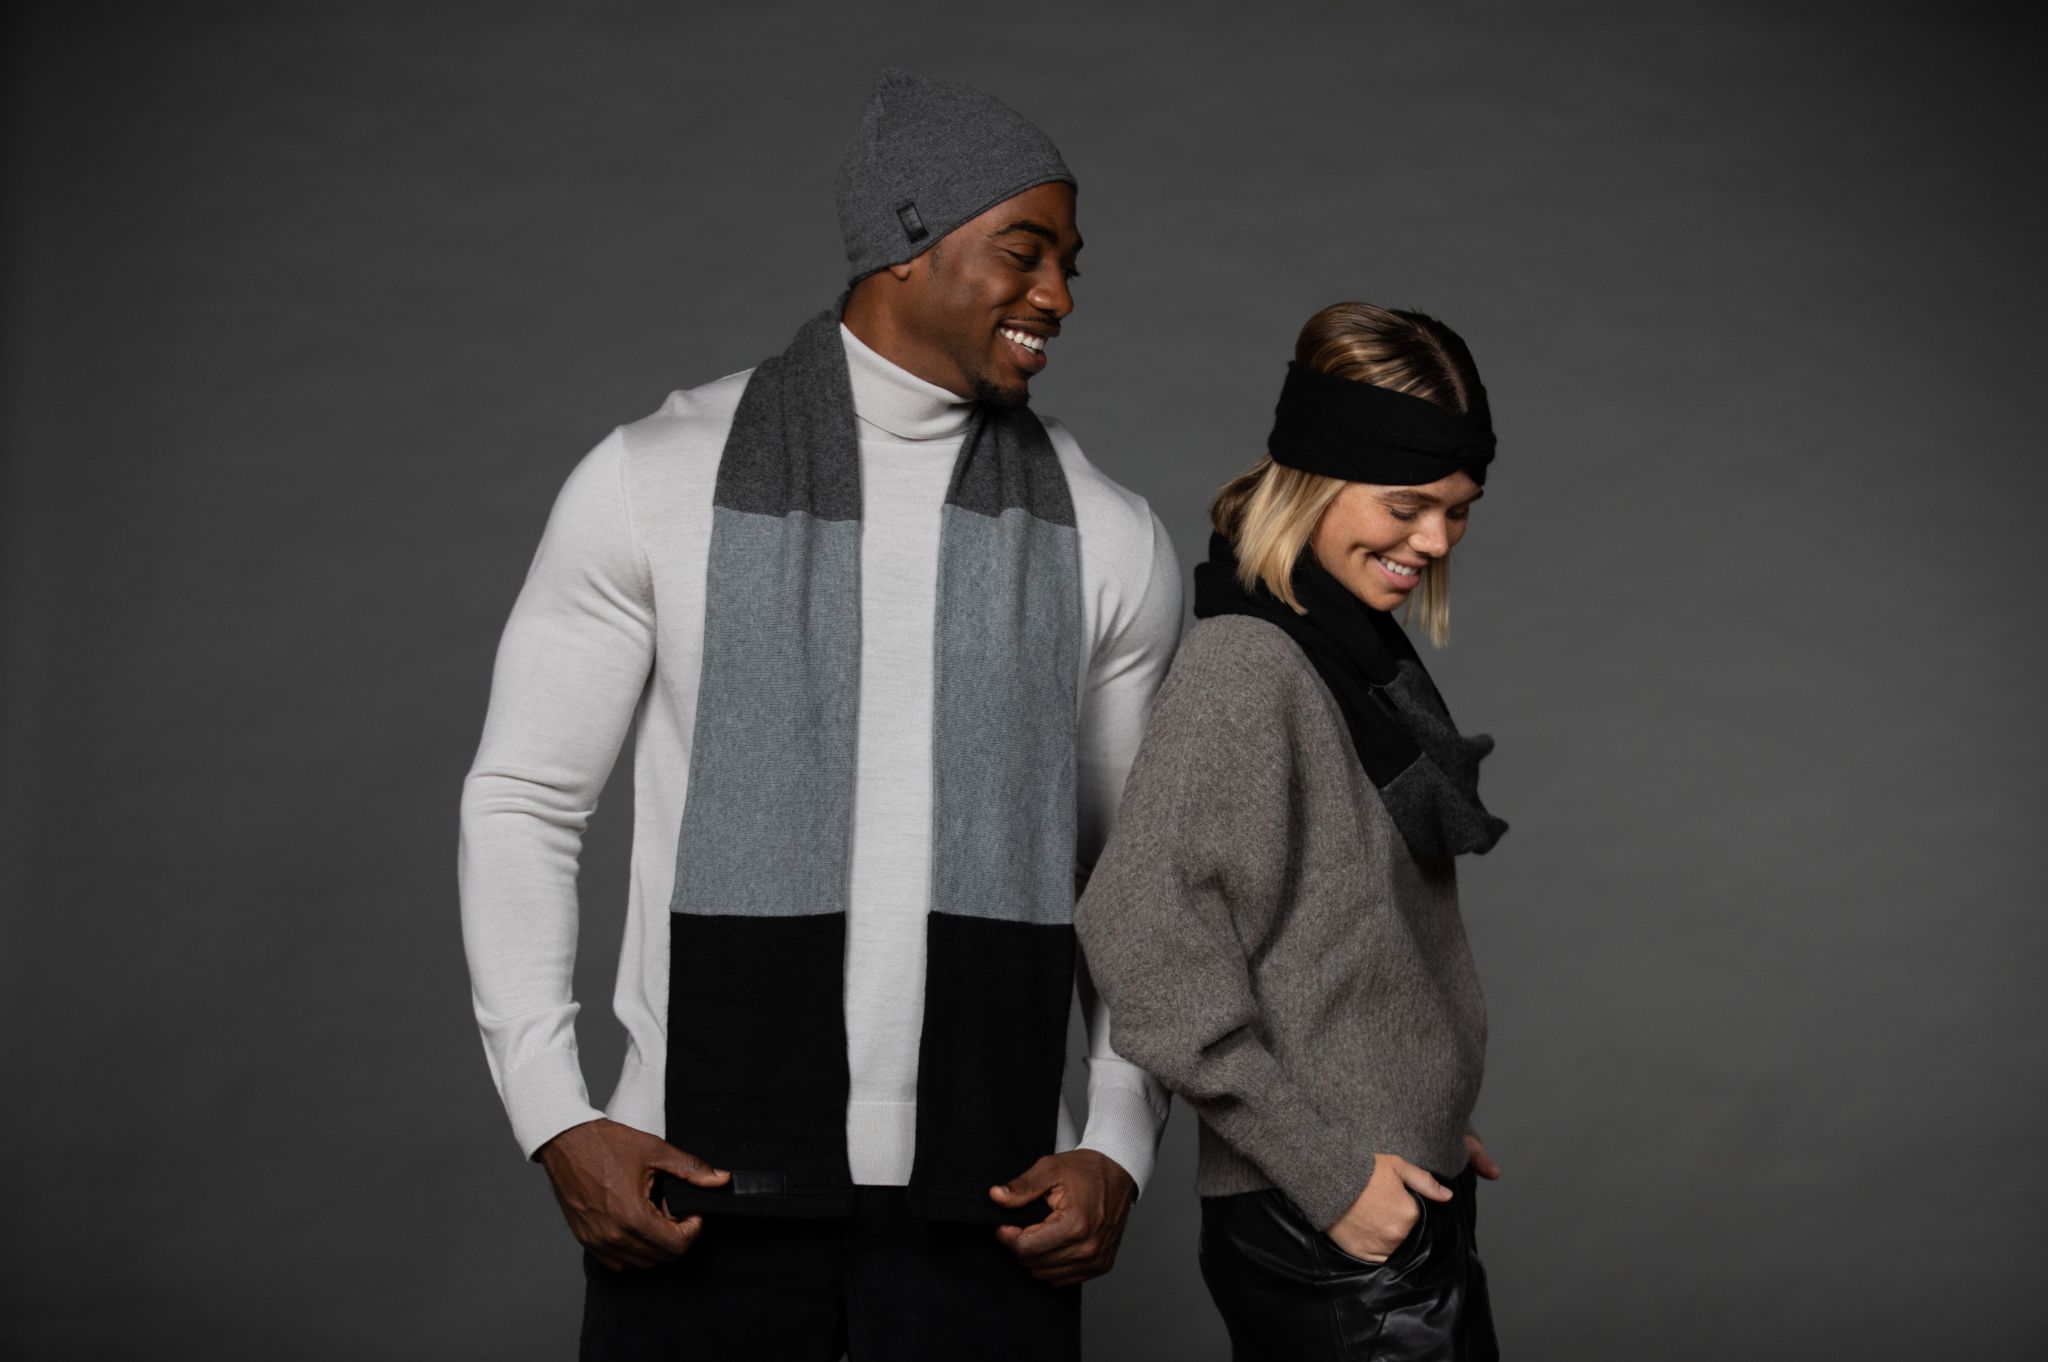 African American male model looking over to the side profile of a female model looking down posing for the camera smiling against a gray backdrop